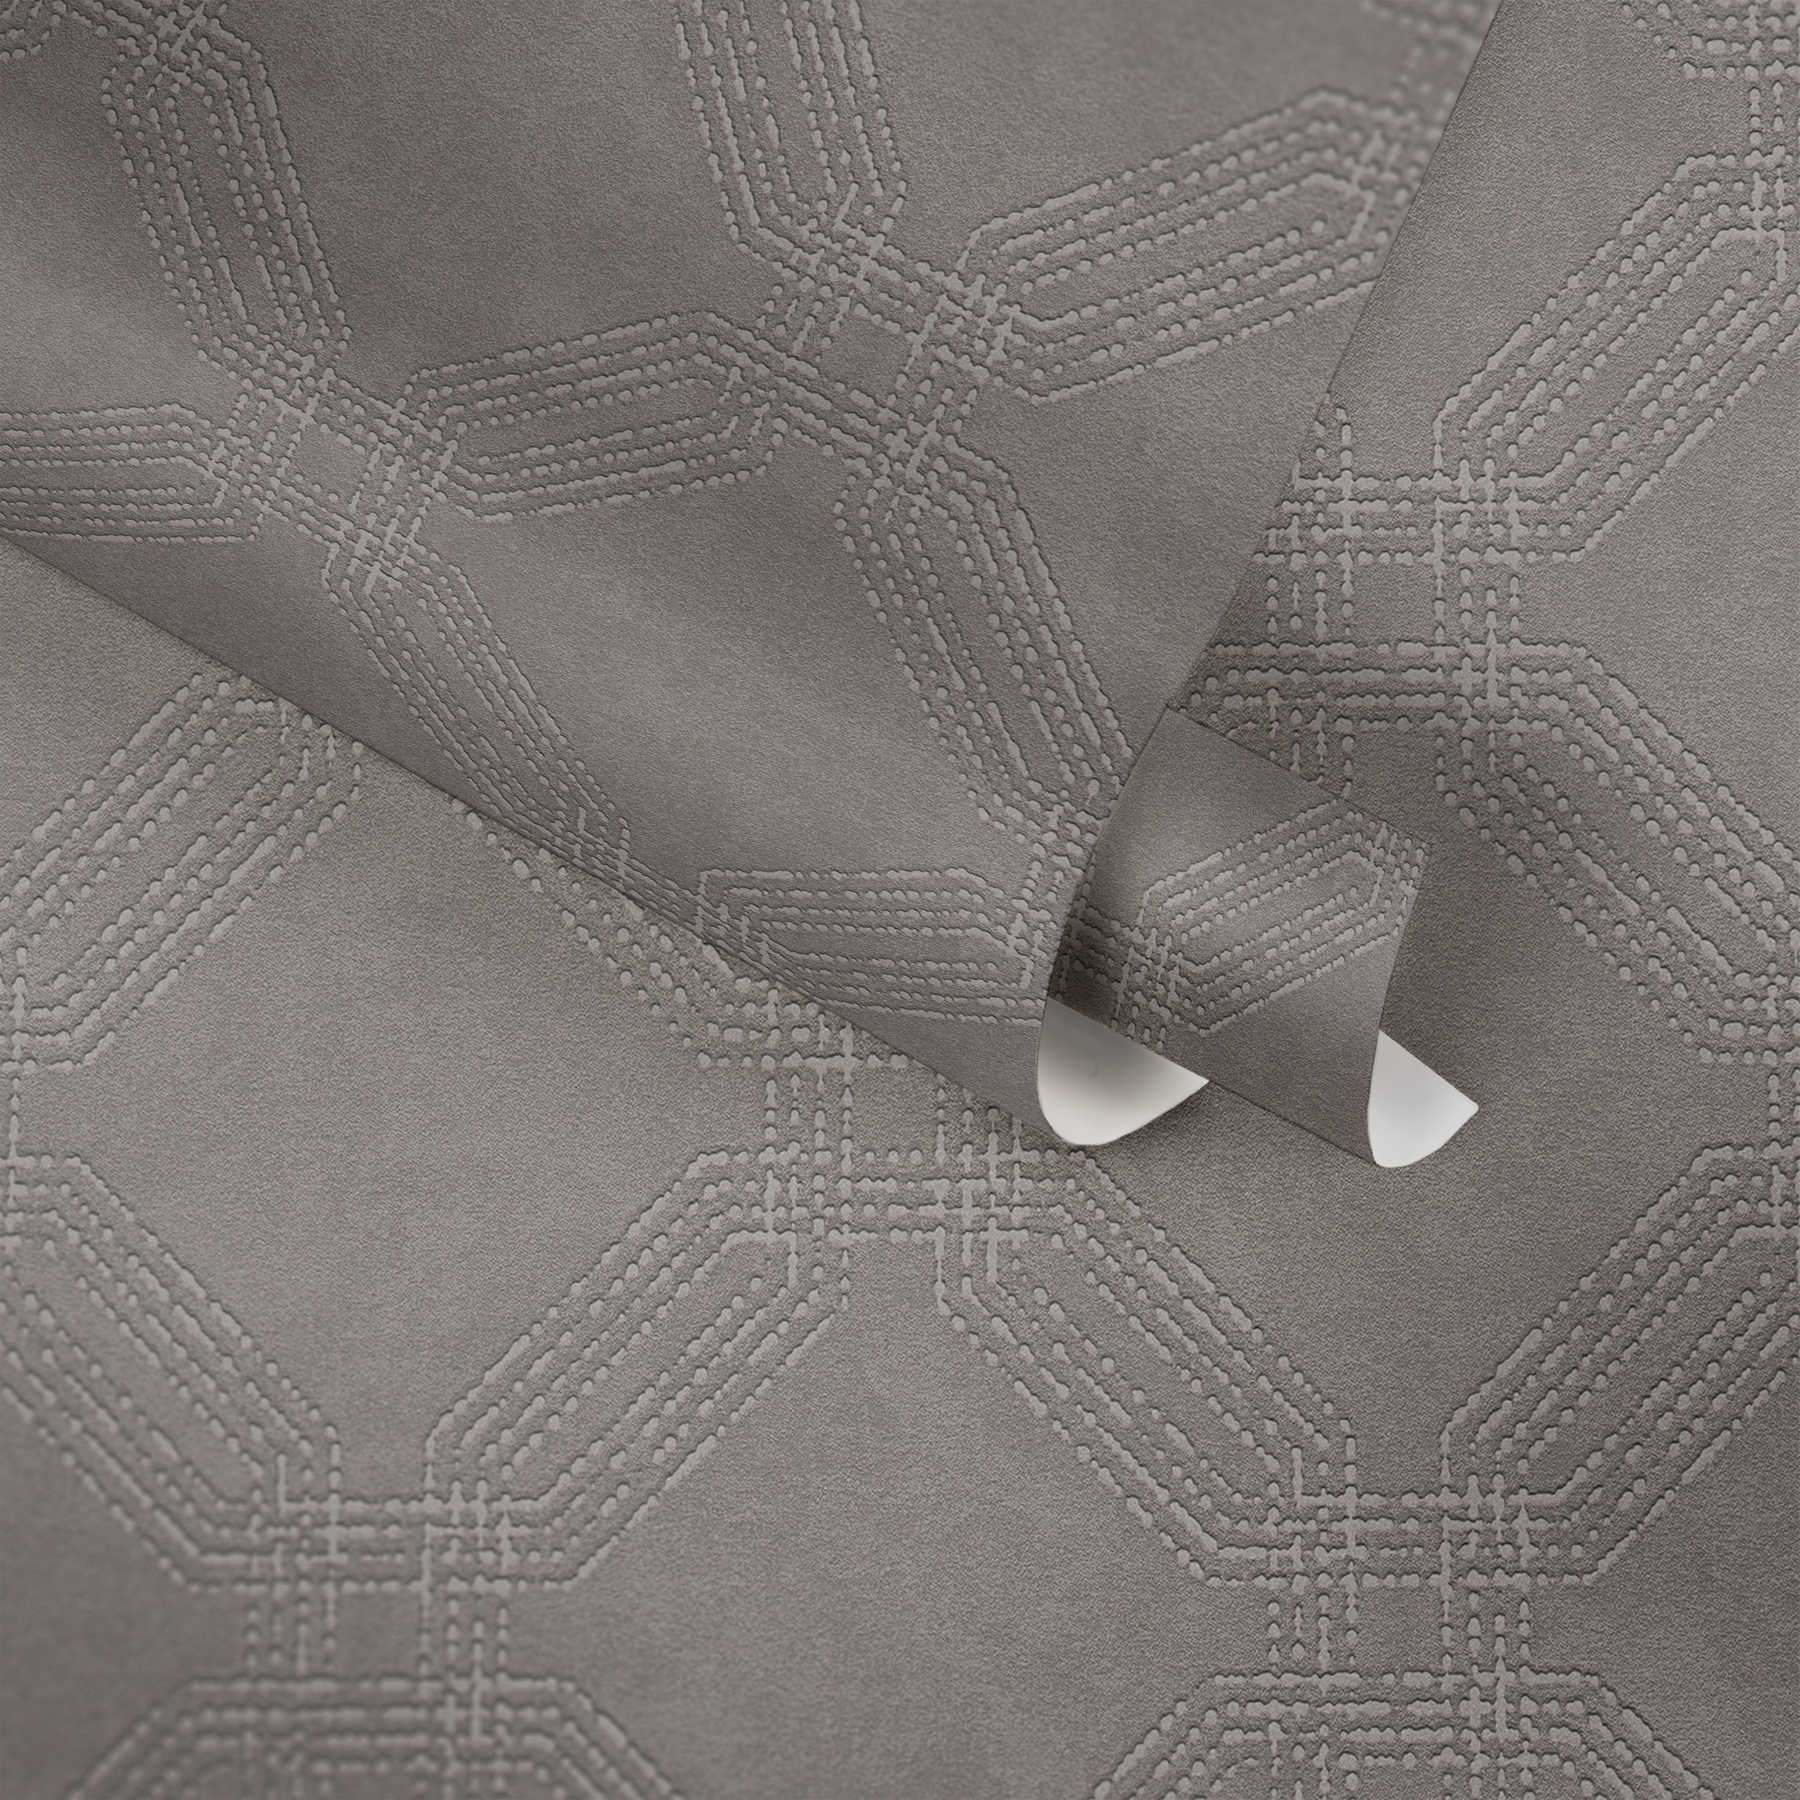             Wallpaper with diamond look, textured - brown, grey, silver
        